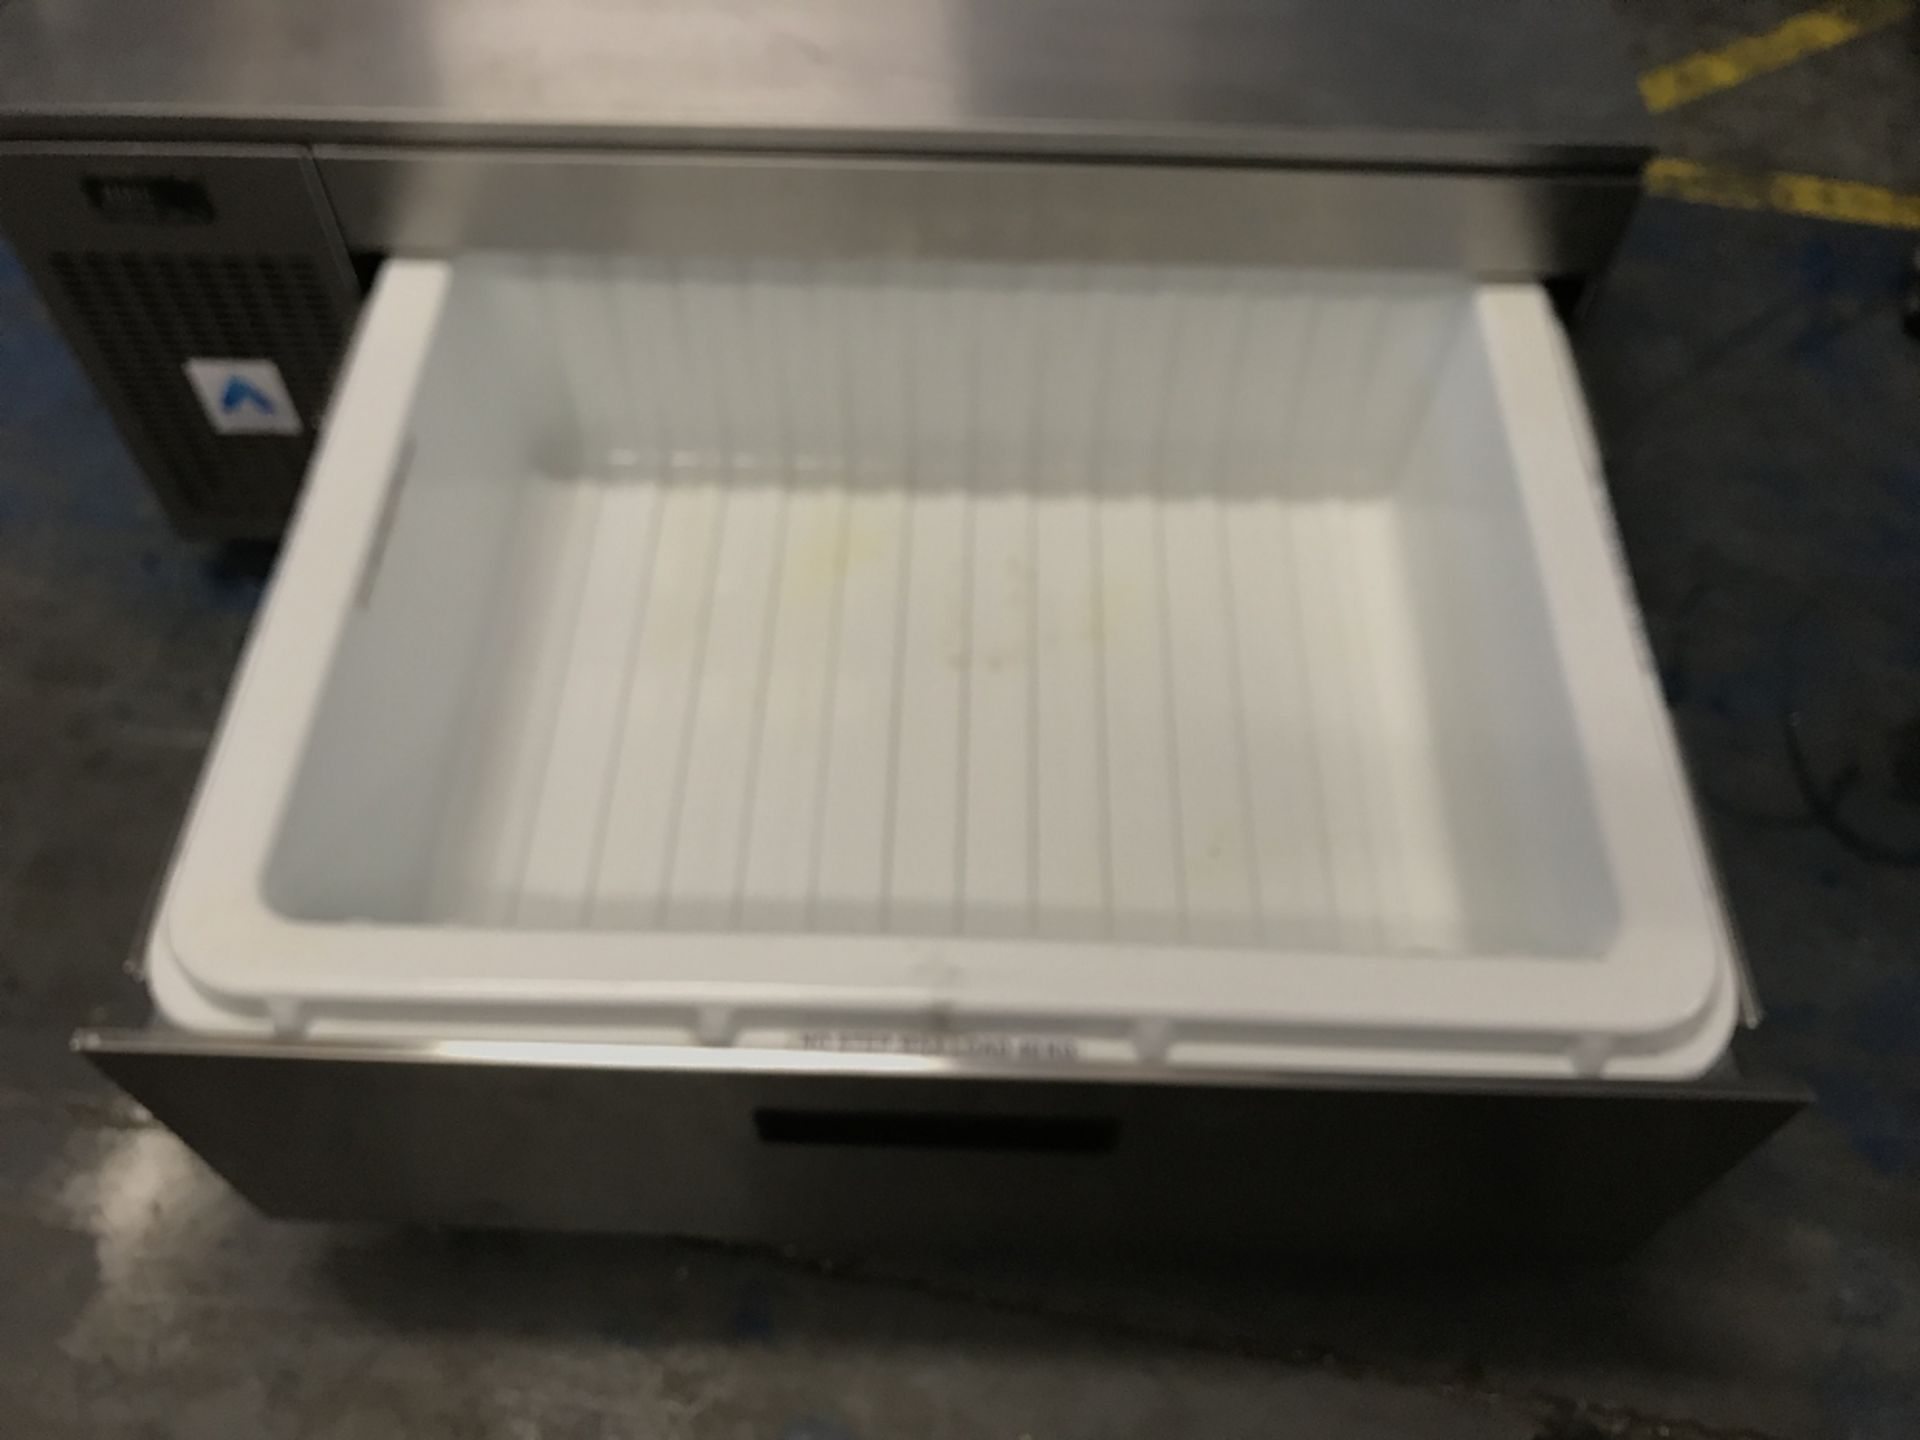 Adande Single Draw Unit can be adjusted to either fridge or freezer, currently with freezer insert - Image 3 of 3